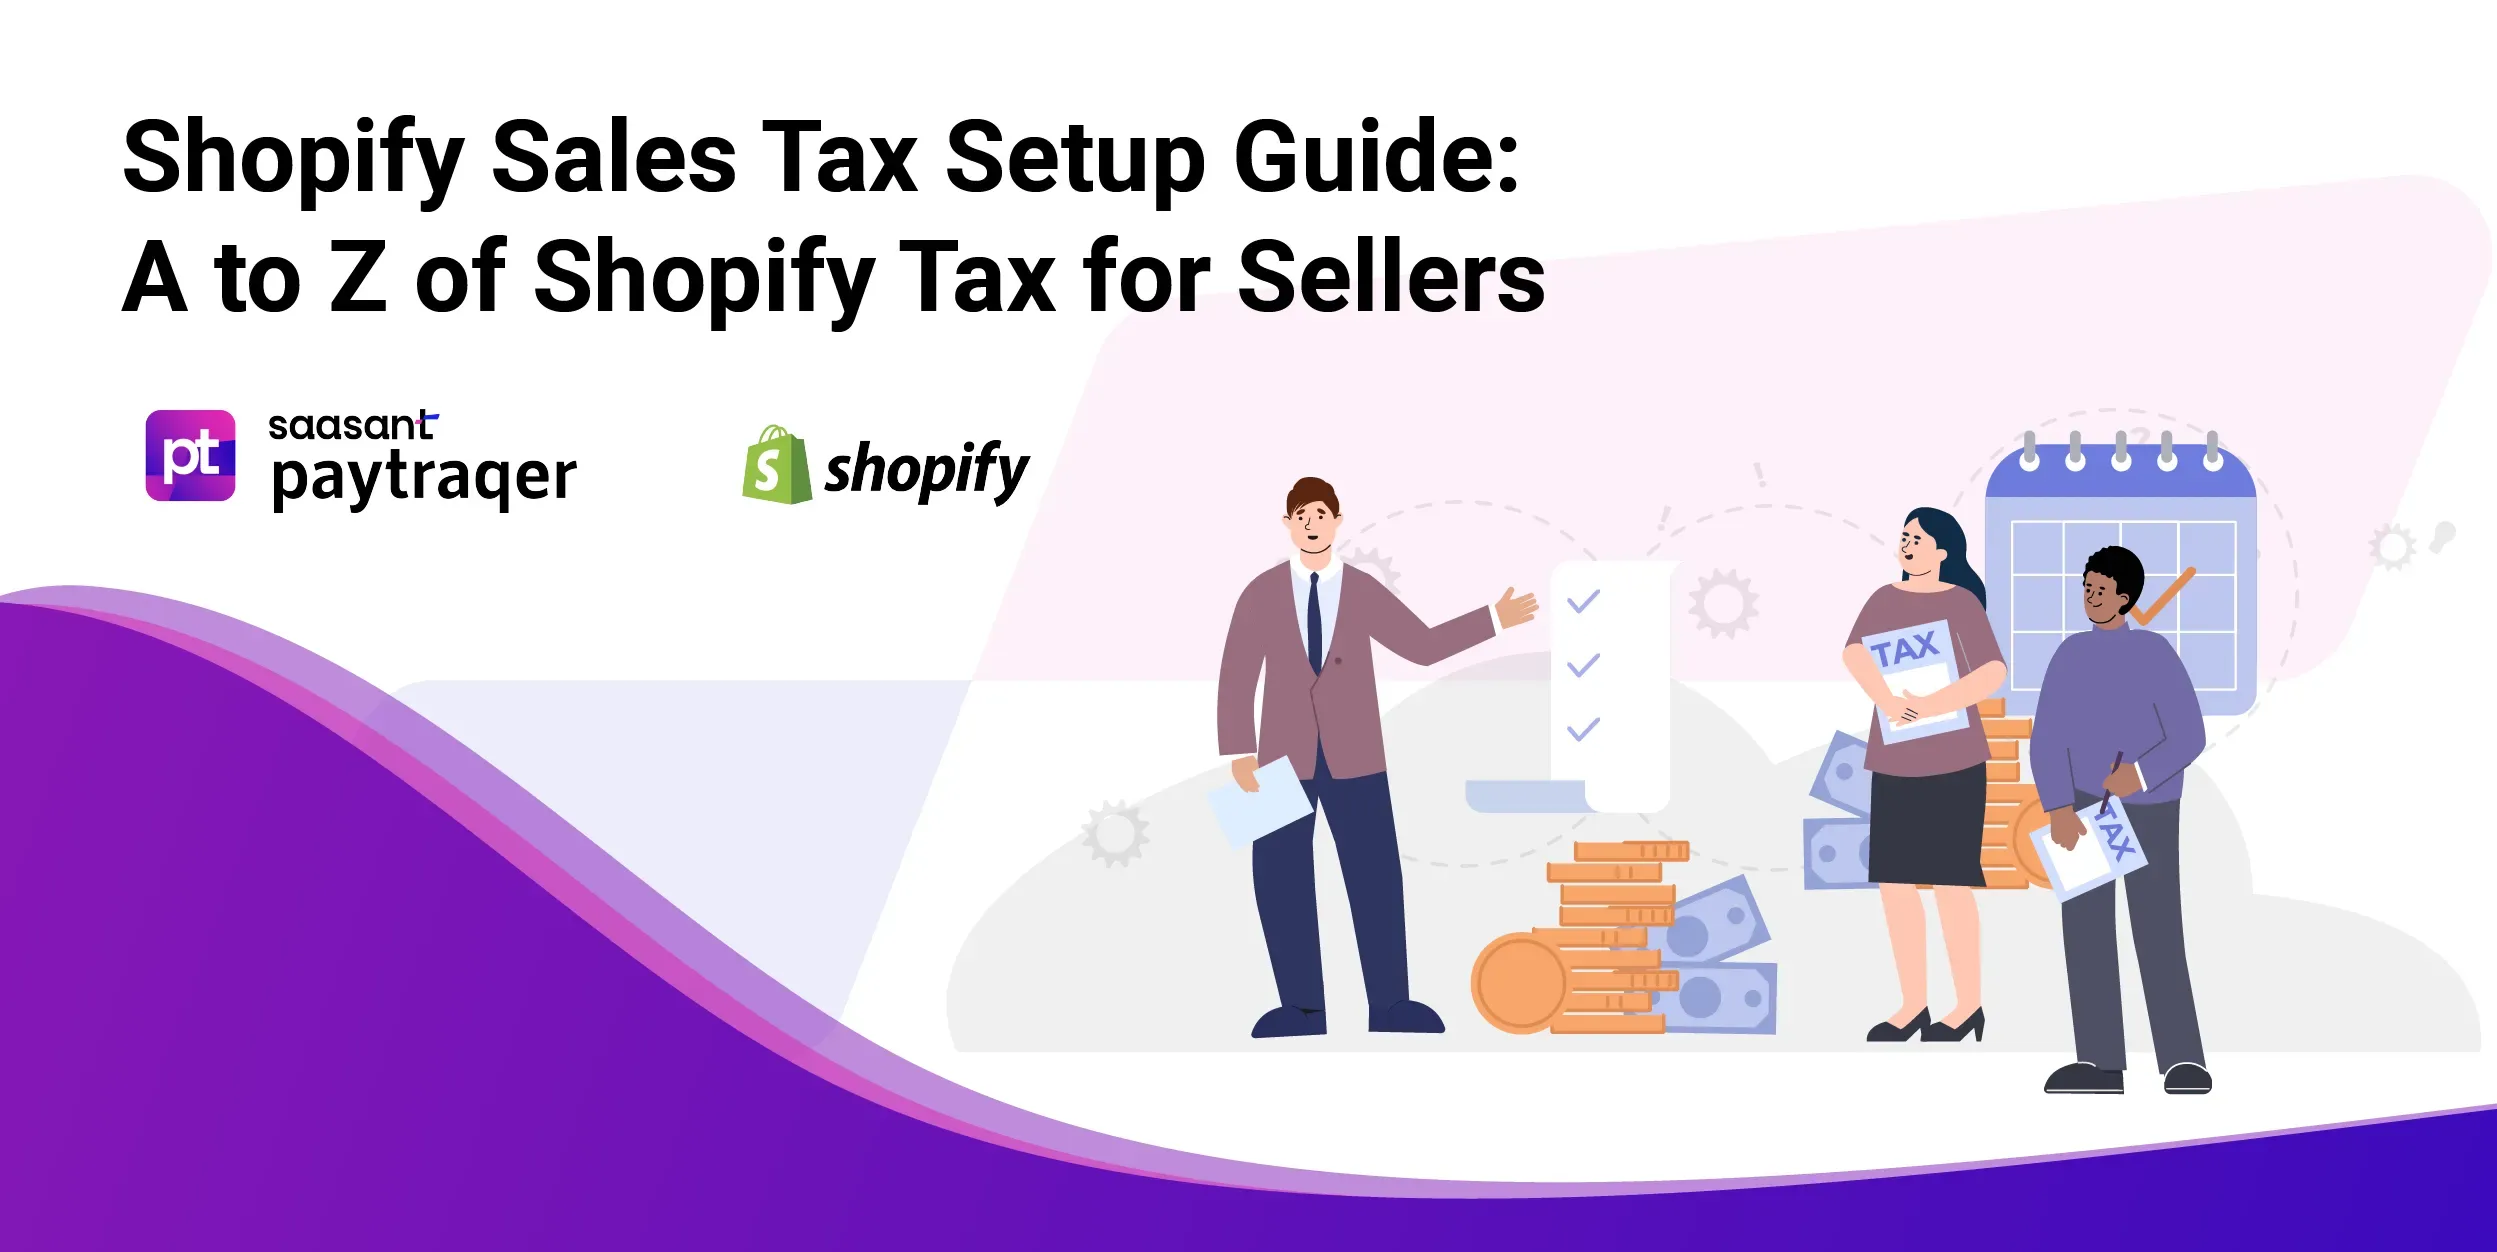 Shopify Sales Tax Setup Guide: A to Z of Shopify Tax for Sellers